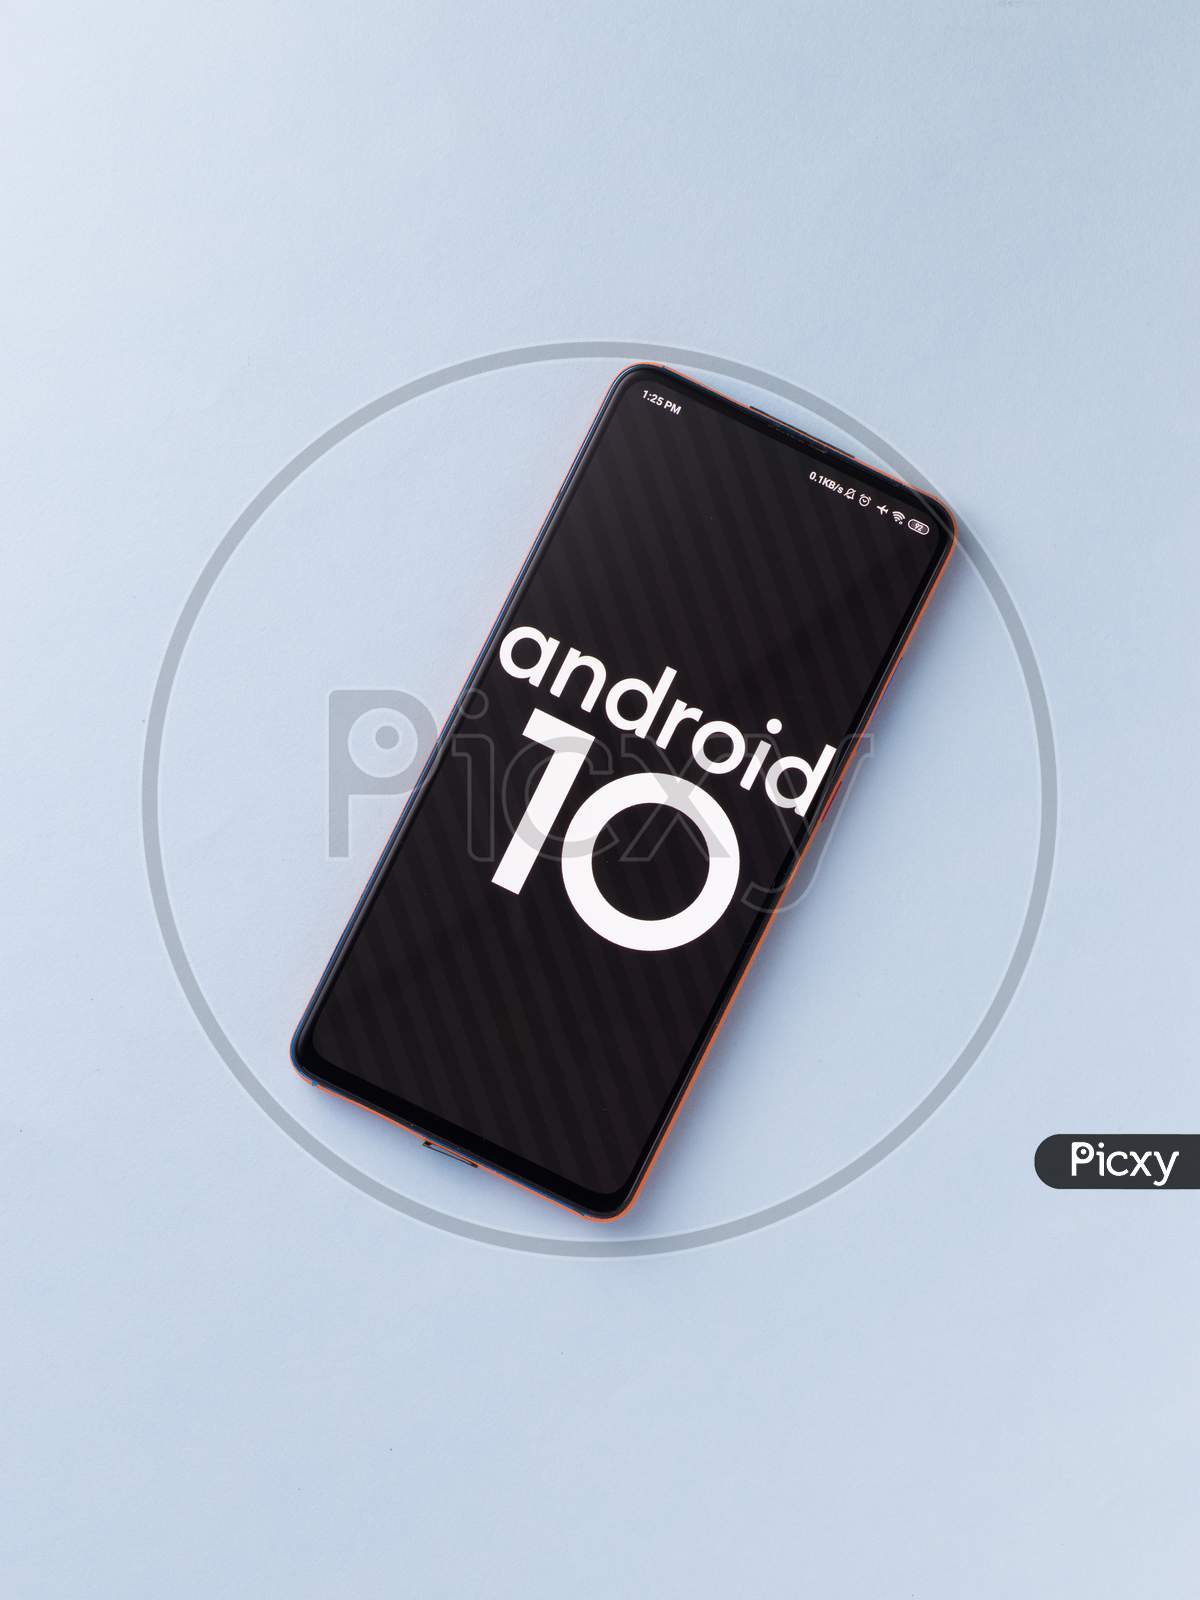 Phone with android 10 Q logo which is the newest operating system of android. wednesday, february 26,2020, Assam, india.